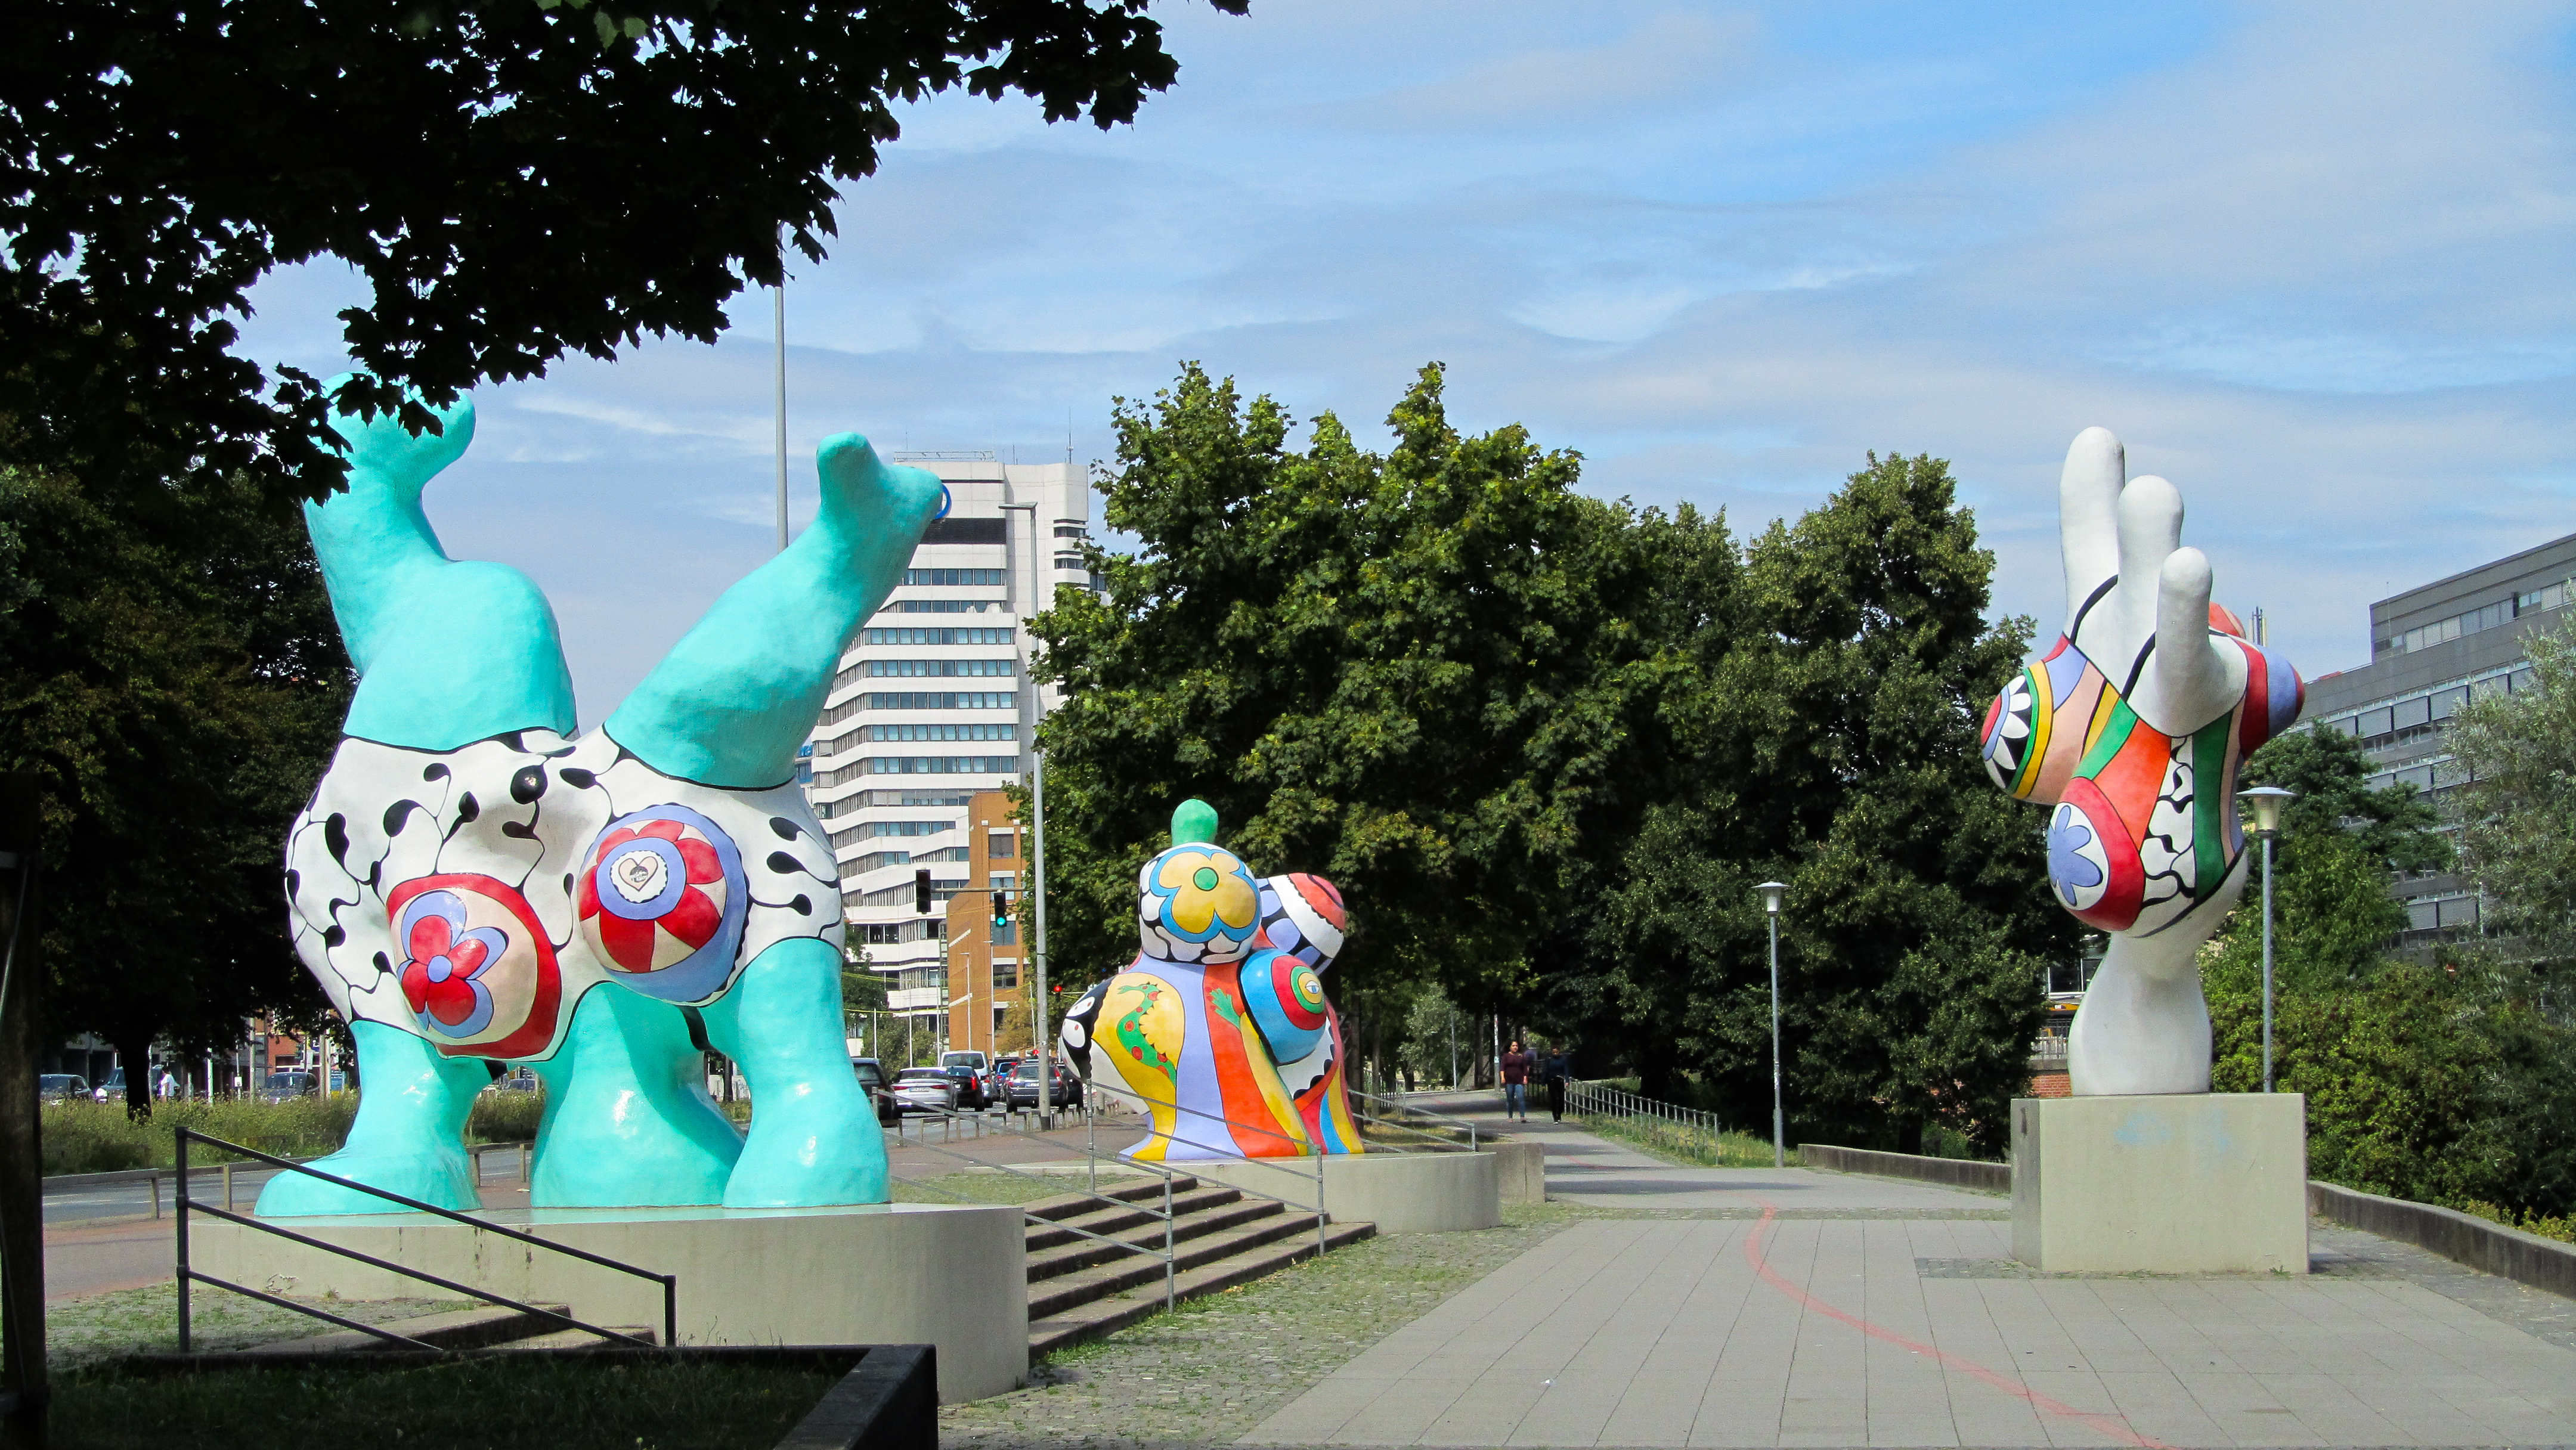 Picture of Nana statues in Hannover city centre